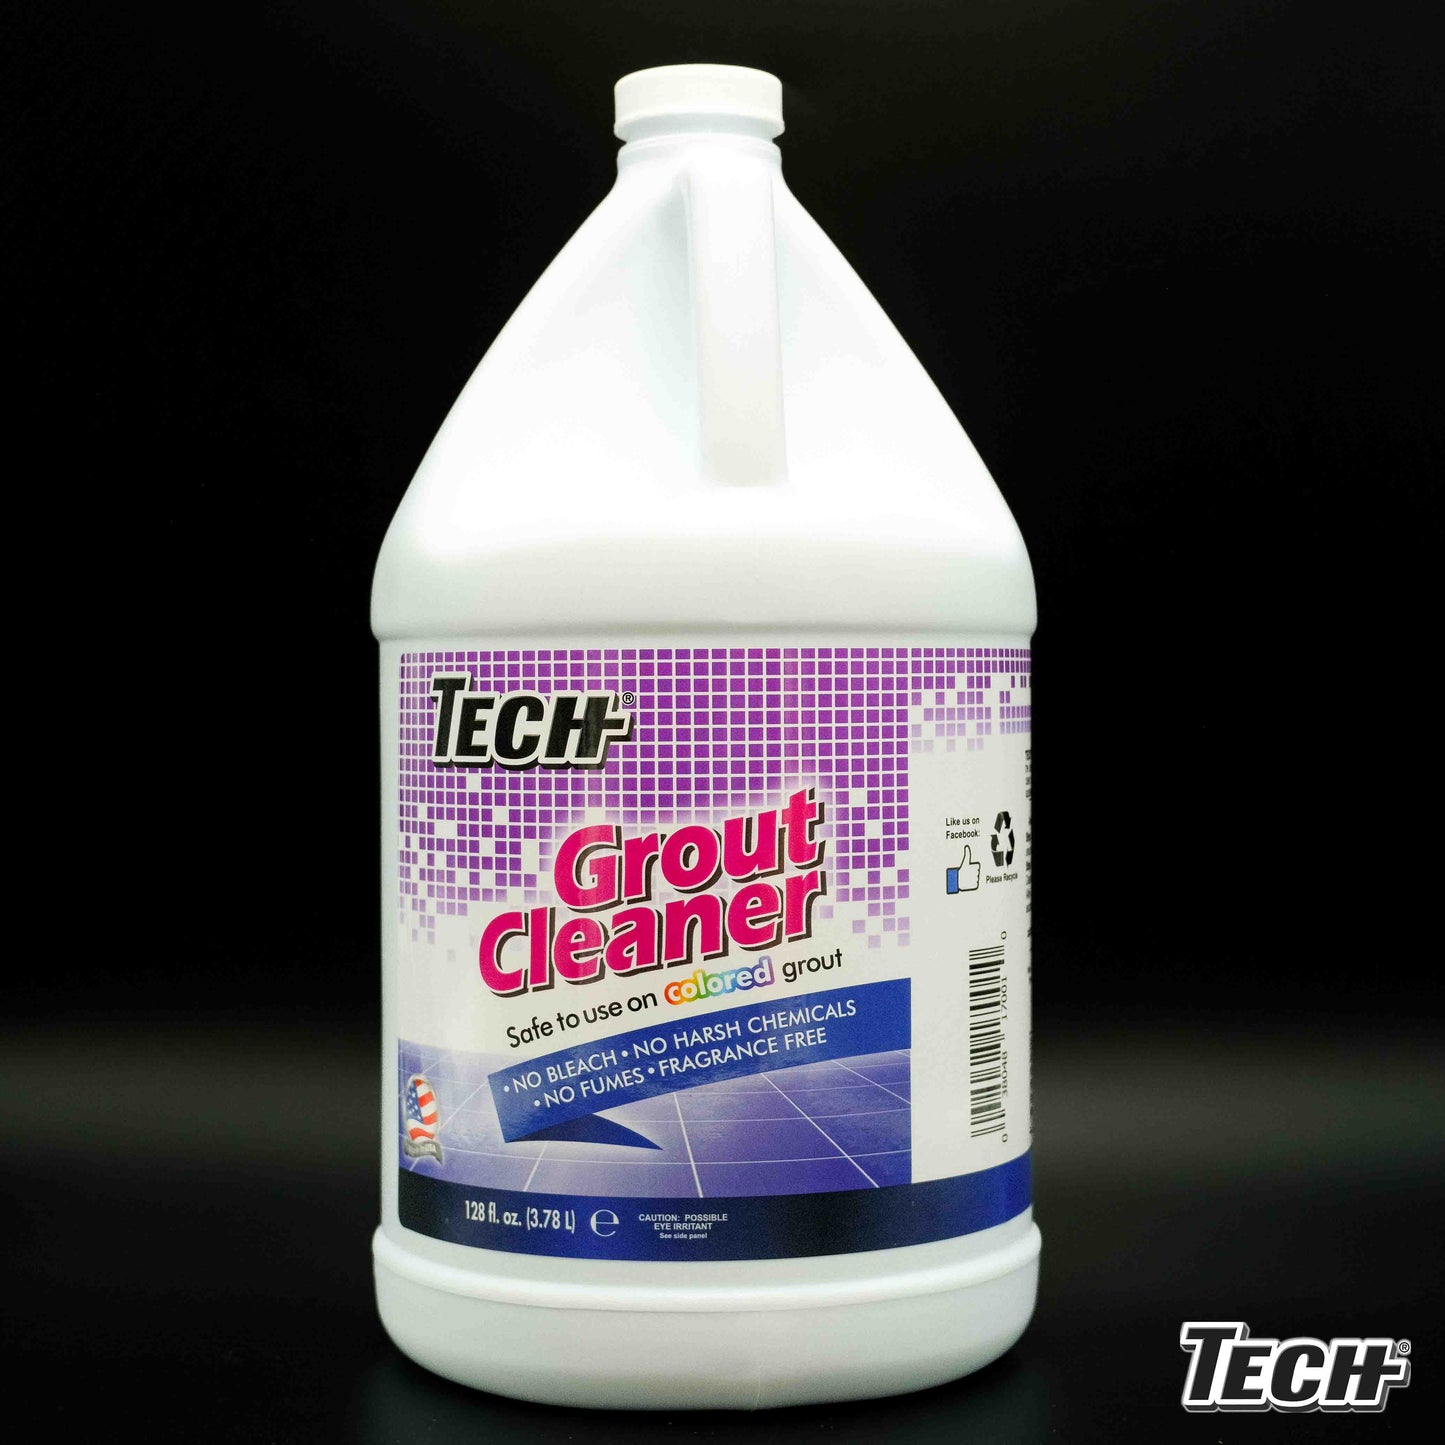 TECH Grout Cleaner 128 oz - Ready To Use Grout Cleaner for Tiles, Floors and Walls with No Harsh Chemicals